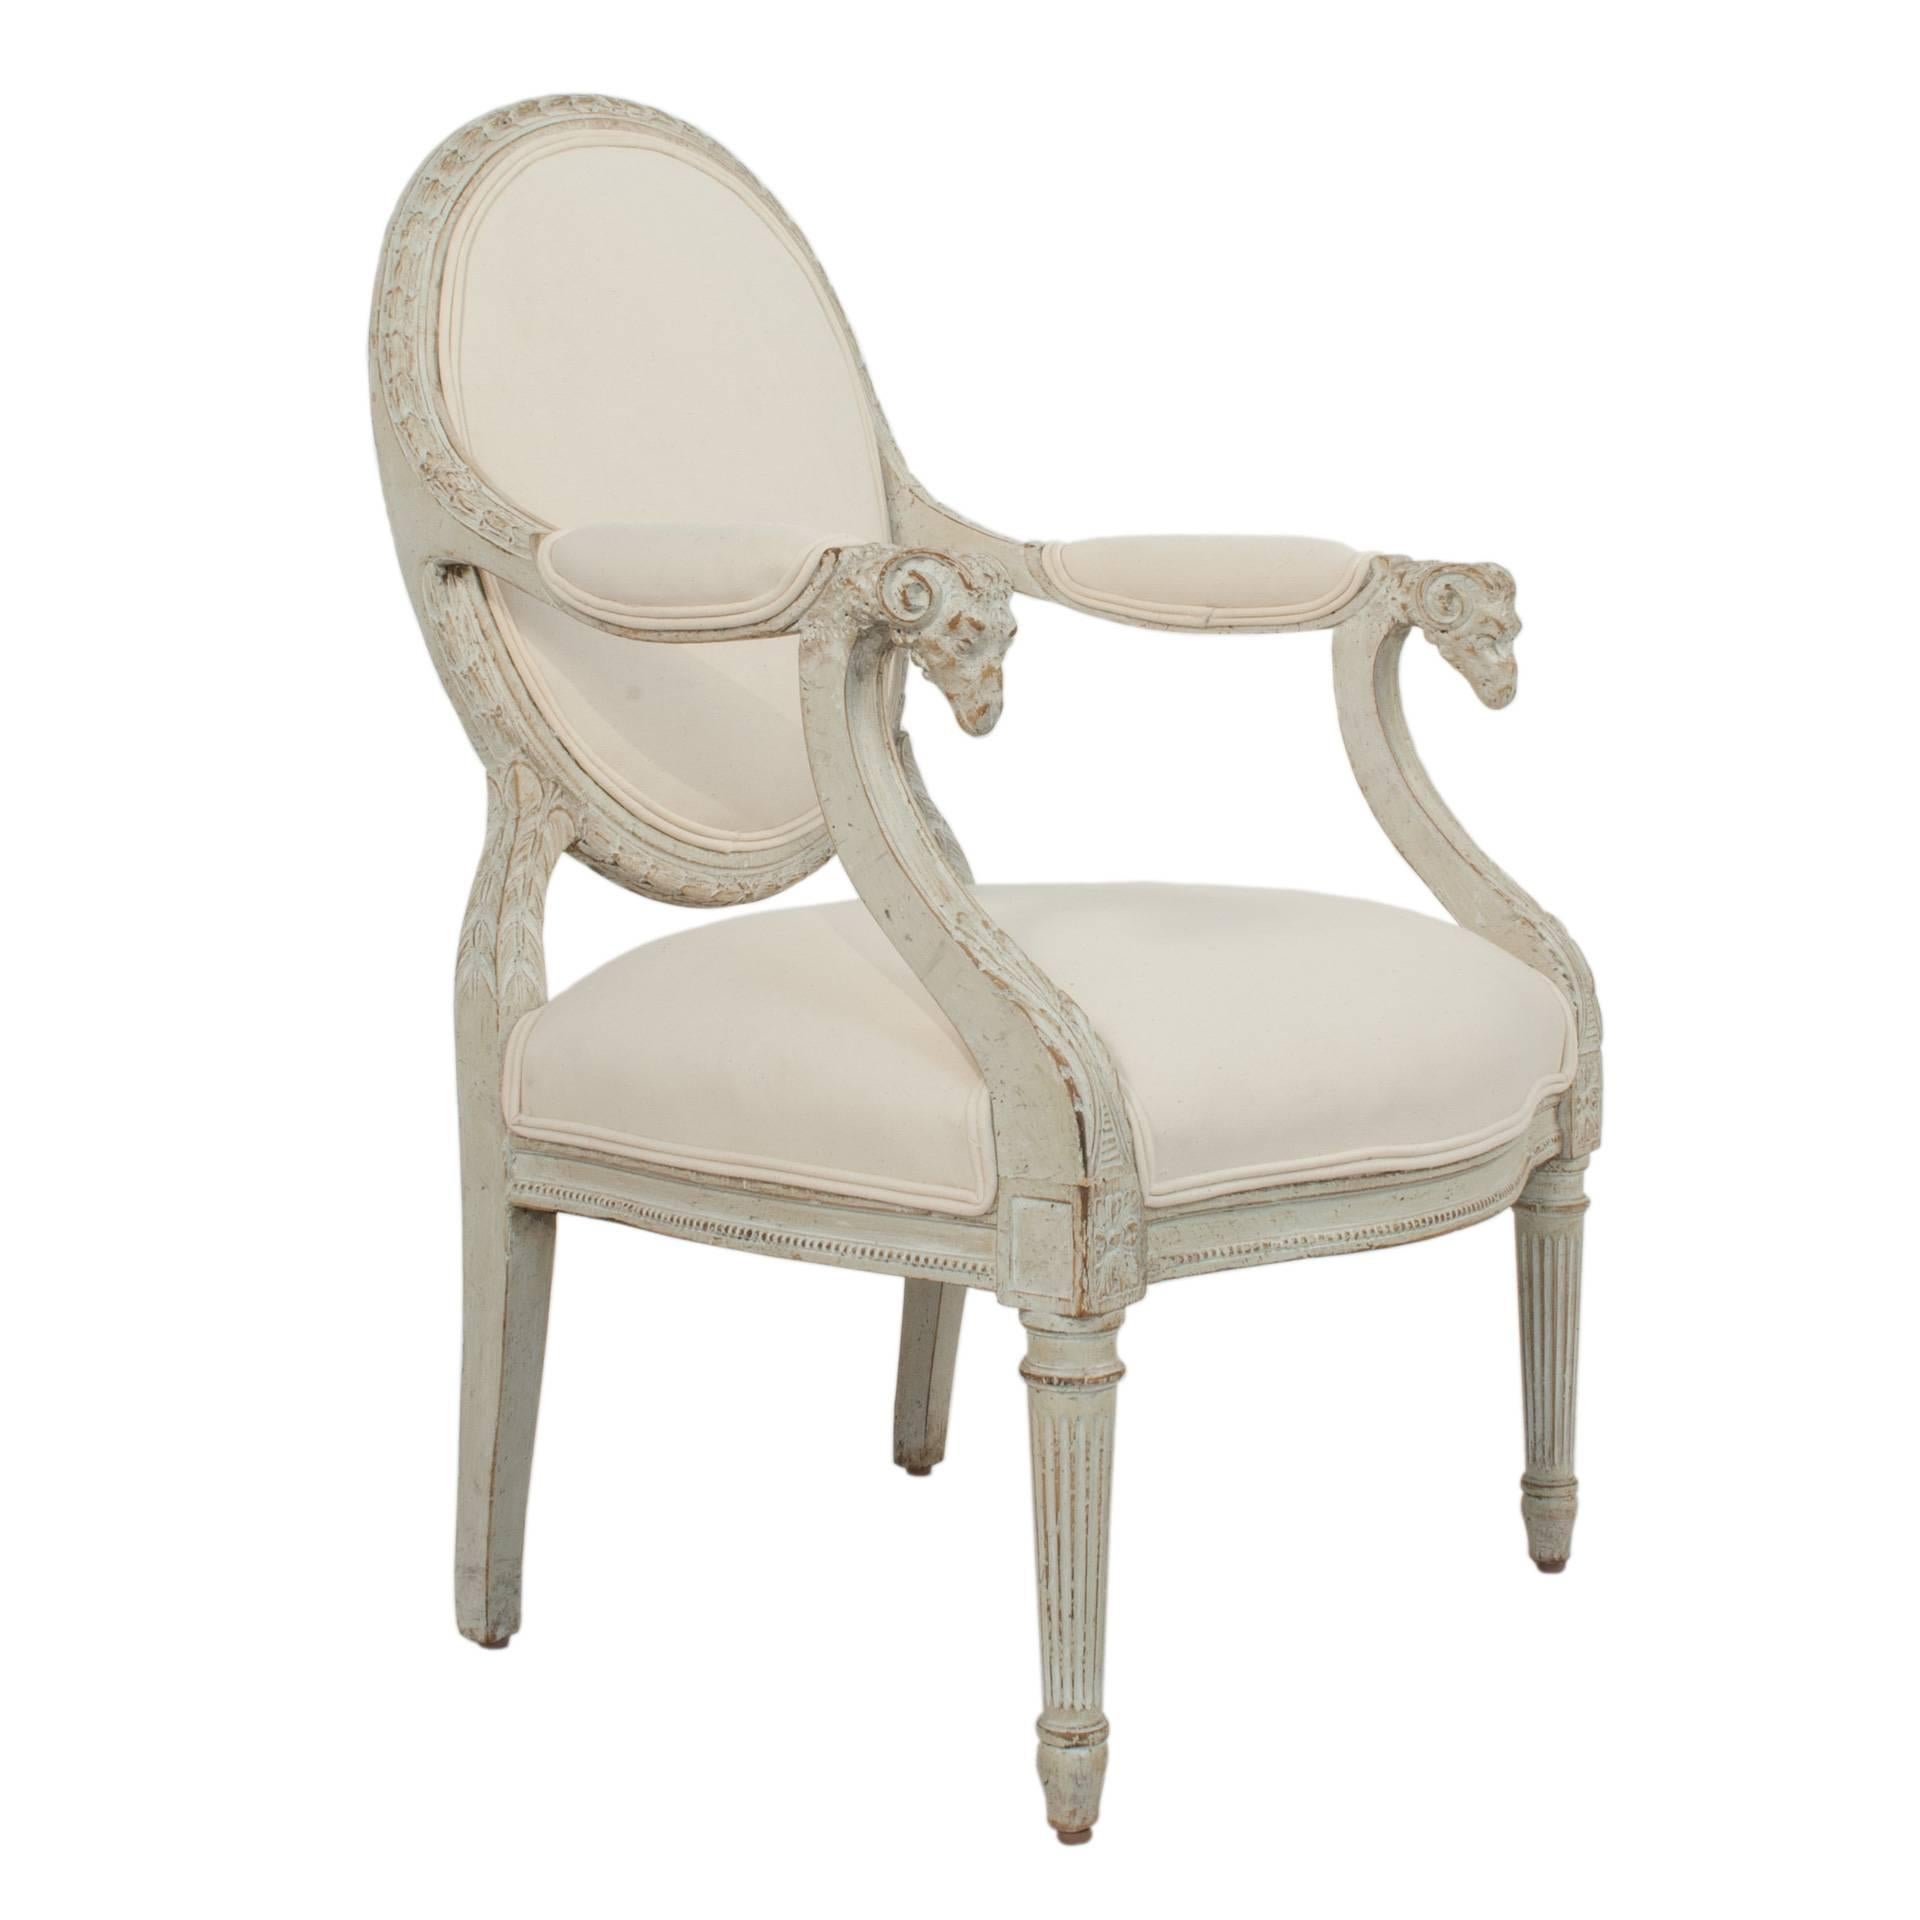 Louis XVI armchair with a worn pale grey patina in the art of Jacob.